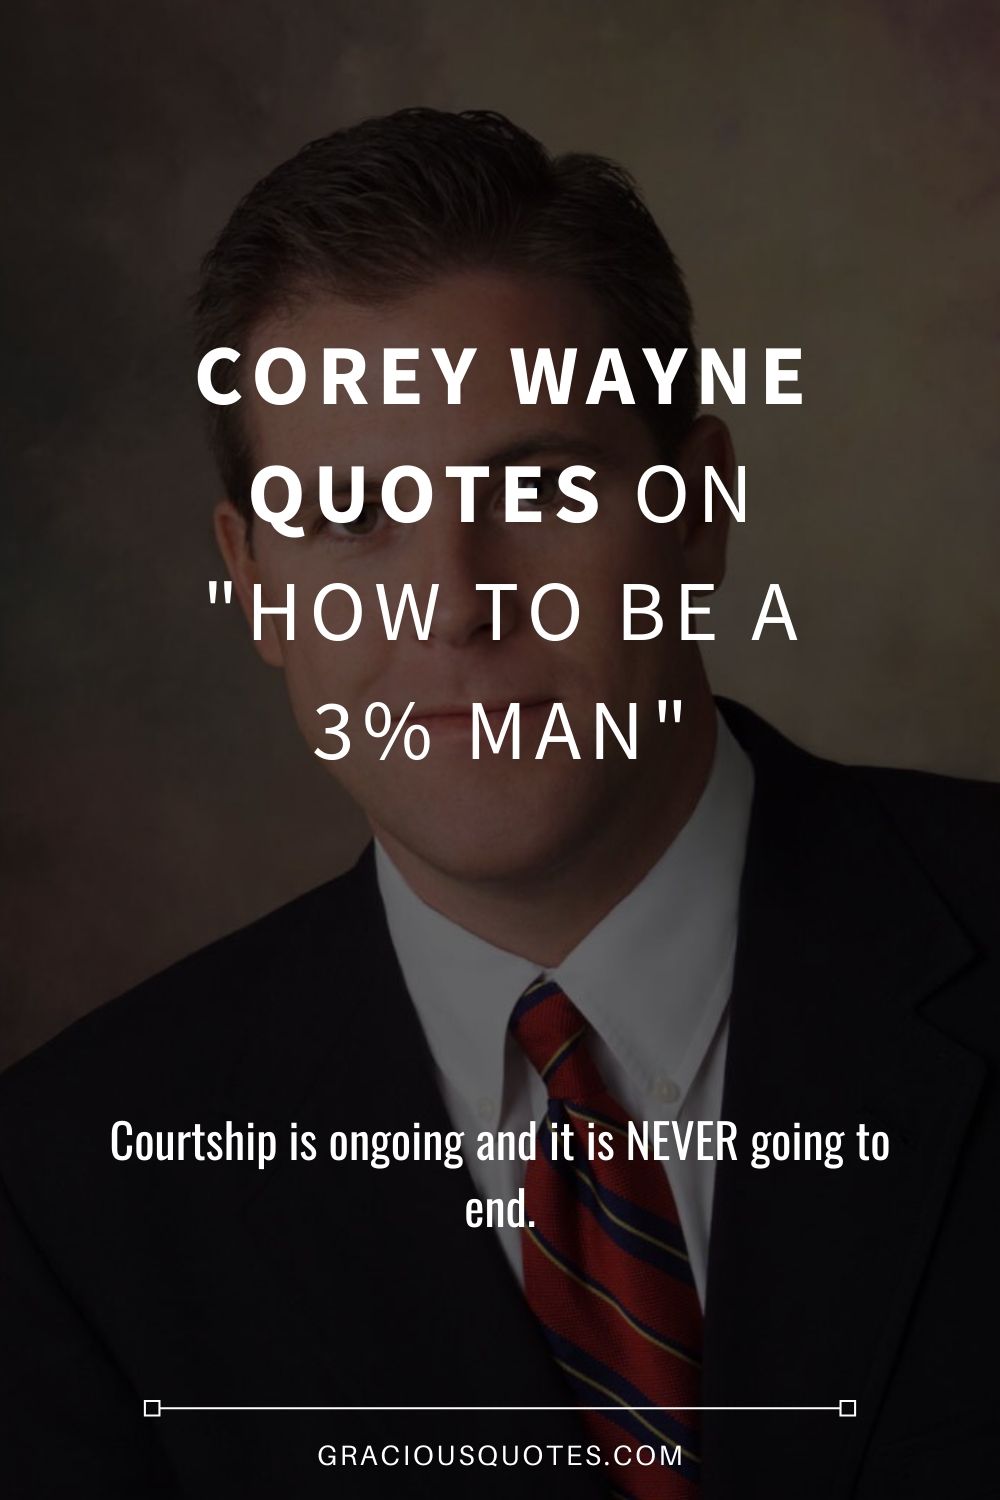 Corey-Wayne-Quotes-on-22How-to-Be-a-3-Man22